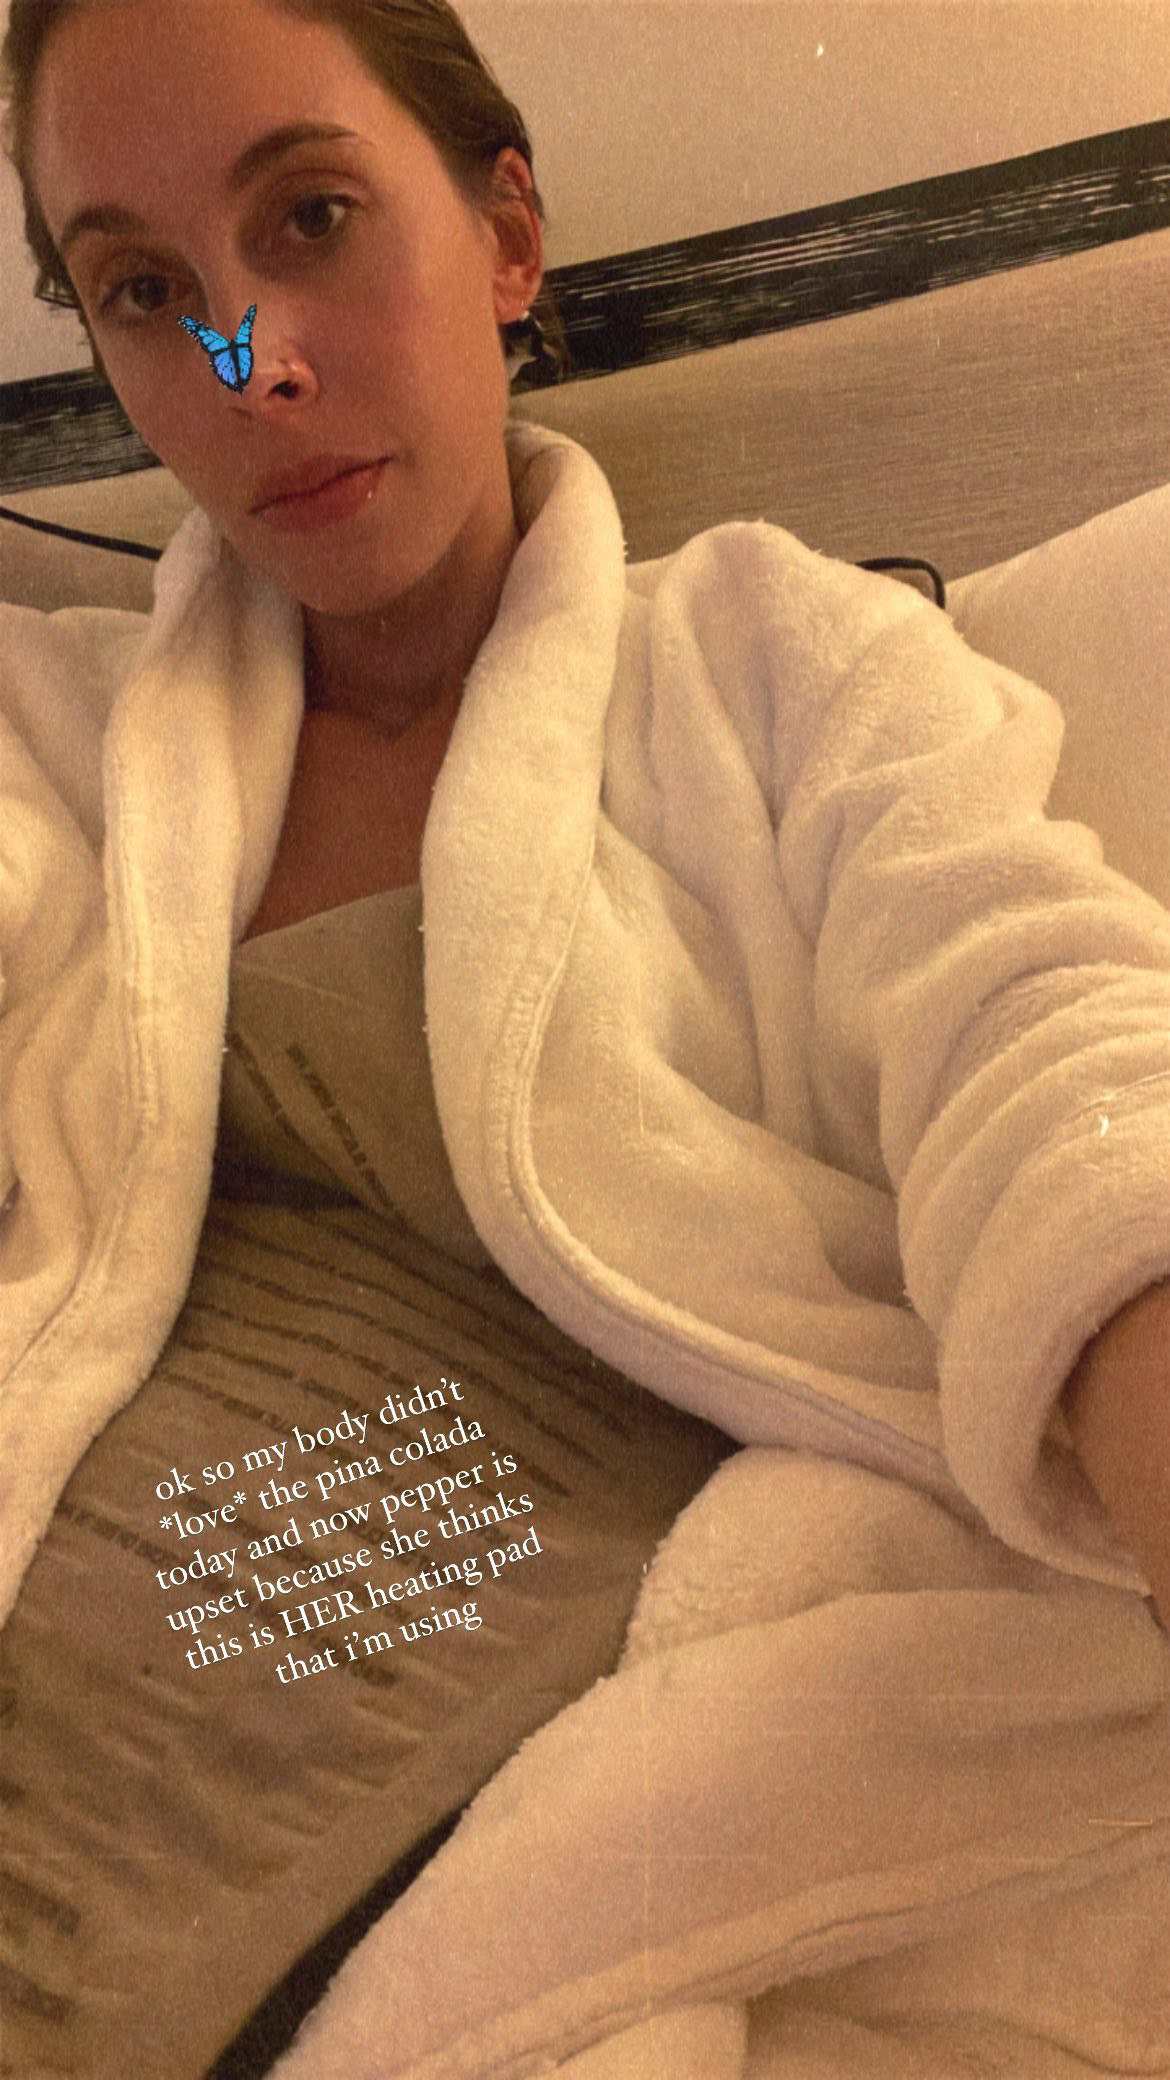 Selfie of the author in bed with the hotel robe